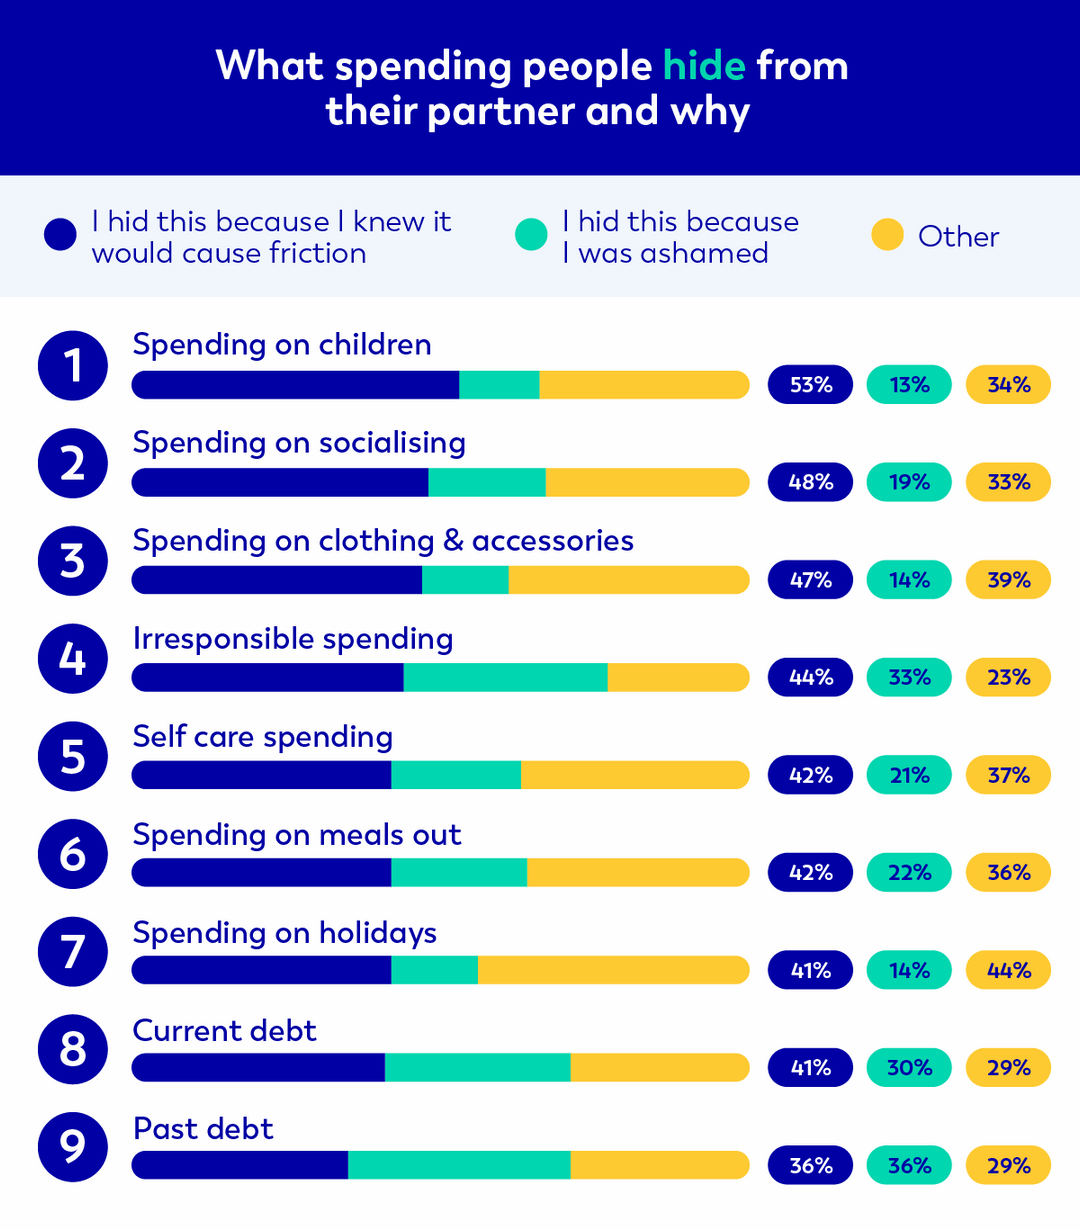 1. Spending on Children 53% hide it because it would cause friction, 13% hide it because of shame.
2. Spending on socialising 48% hide it because it would cause friction, 19% hide it because of shame.
3. Spending on clothing & accessories 47% hide it because it would cause friction, 14% hide it because of shame.
4. Irresponsible spending 44% hide it because it would cause friction, 33% hide it because of shame.
5. Self care spending 42% hide it because it would cause friction, 21% hide it because of shame.
6 Spending on meals out 42% hide it because it would cause friction, 22% hide it because of shame.
7. Spending on holidays 41% hide it because it would cause friction, 14% hide it because of shame.
8. Current debt 41% hide it because it would cause friction, 30% hide it because of shame.
9. Past debt 36% hide it because it would cause friction, 36% hide it because of shame.